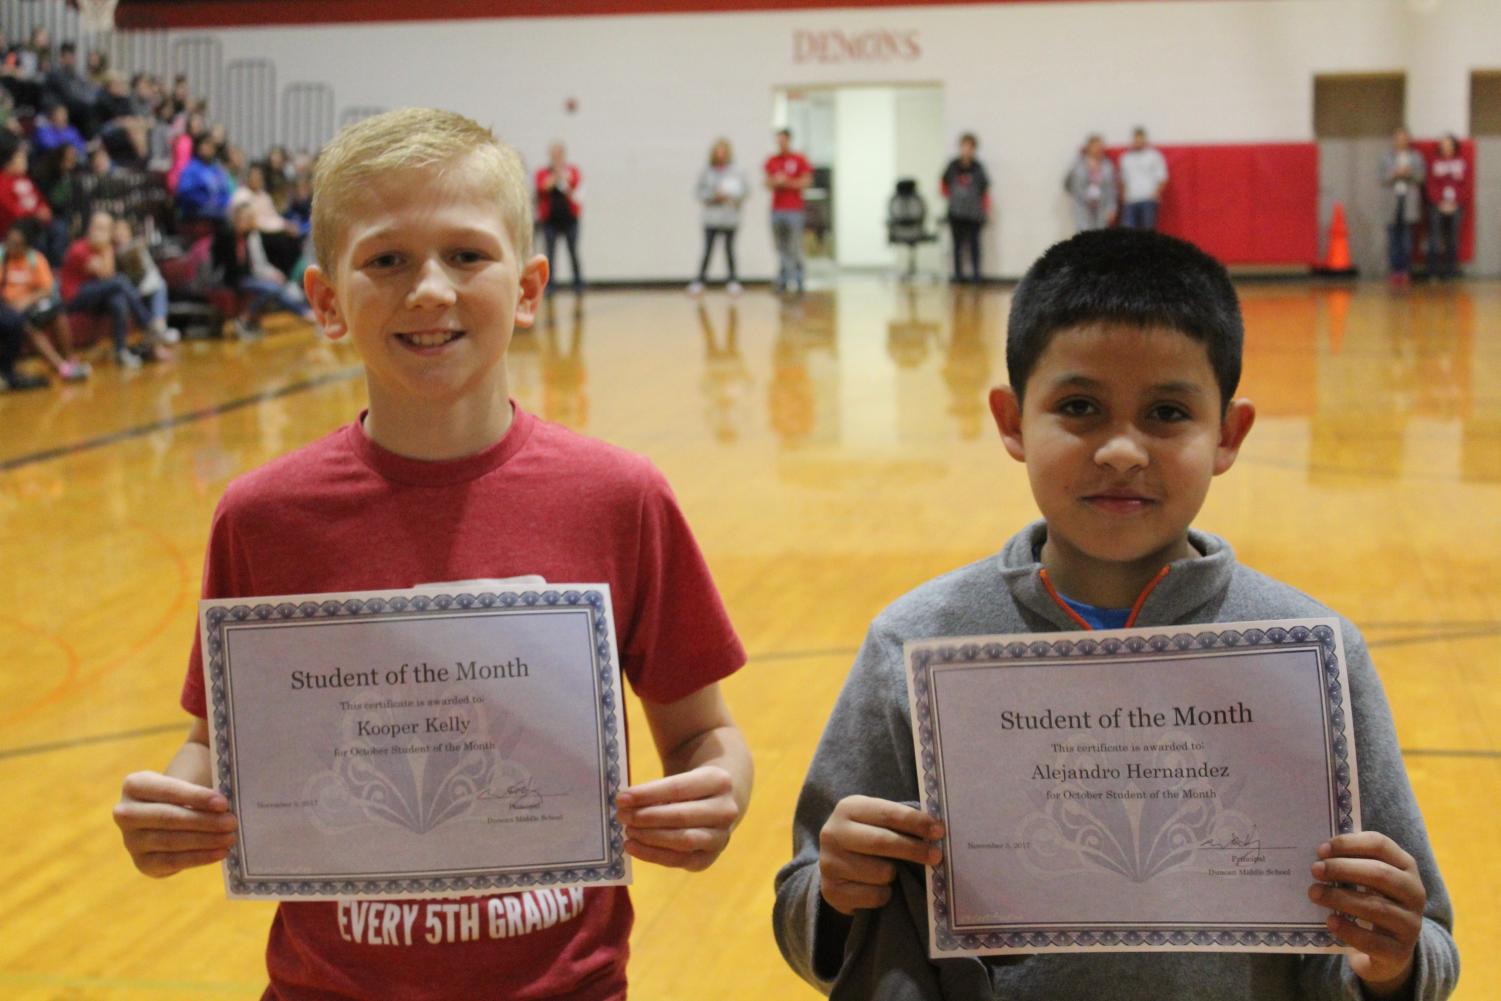 Kooper Kelly and Alex Hernandez were a few of the students recognized as students of the month for October.